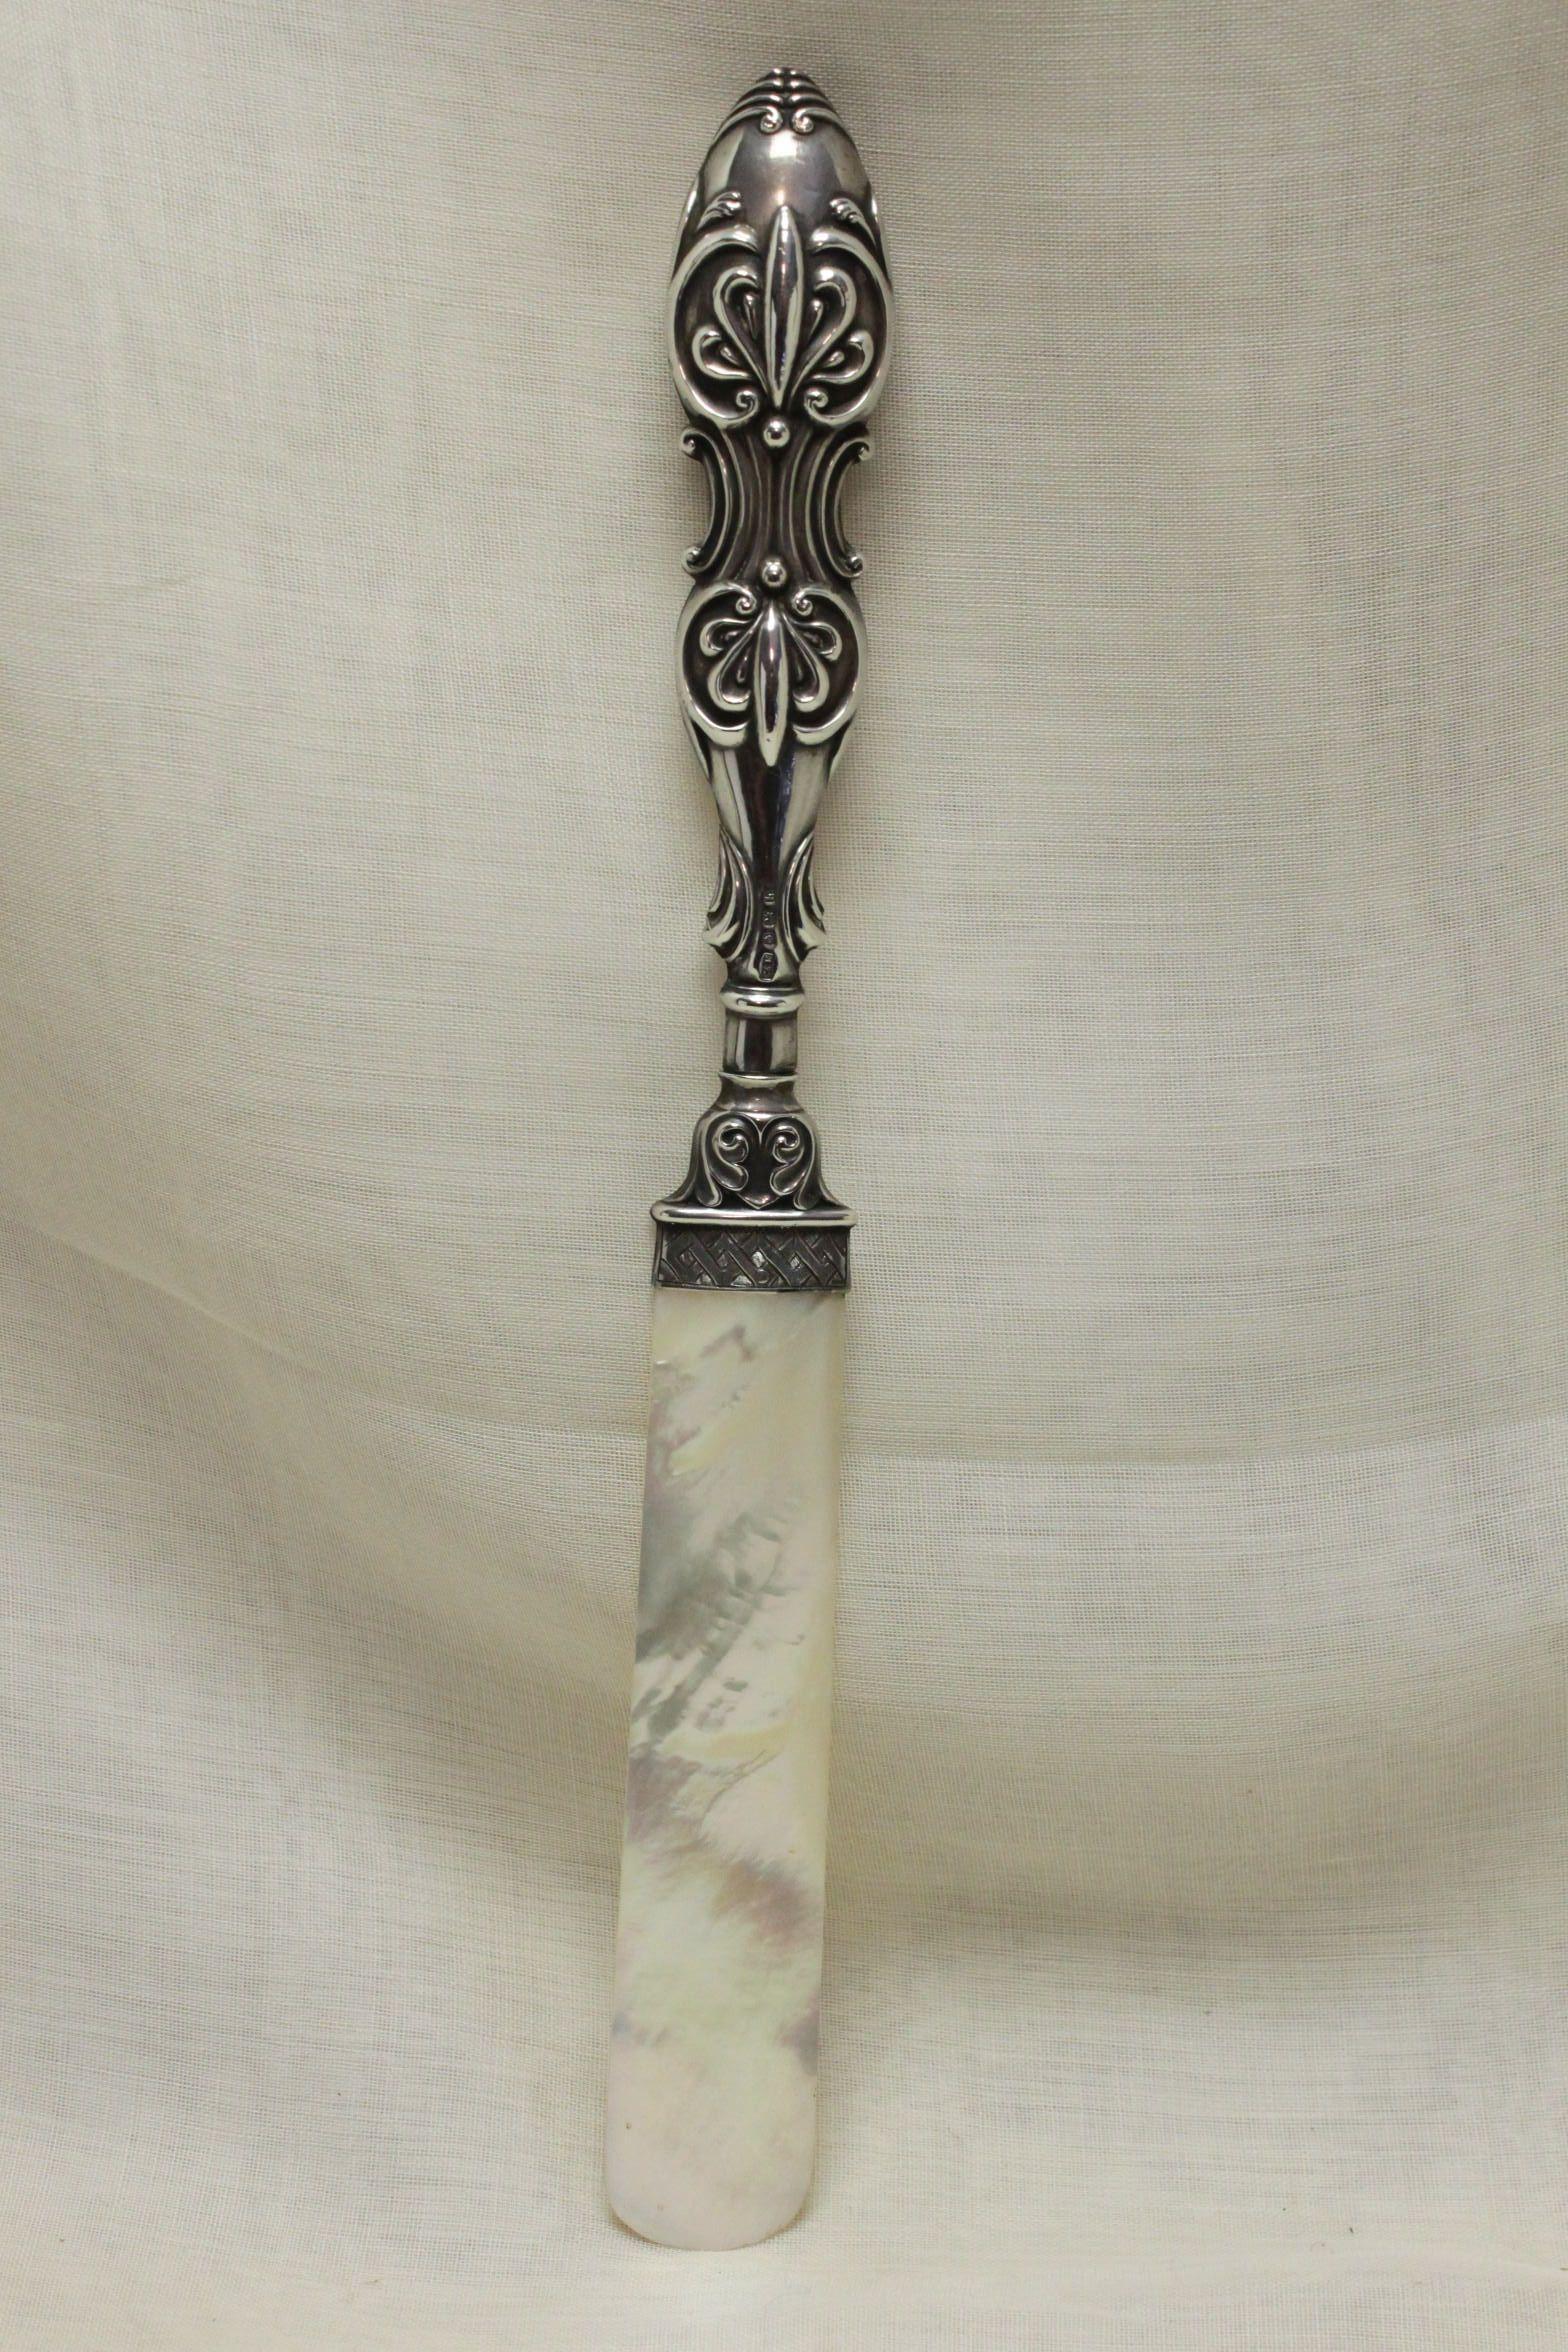 This sterling silver handled paper knife features a blade of Mother-of-pearl of lovely colour and figure, and is a rare survivor. Due to the fragility of the blade, these are obviously much rarer than those with more durable blades. Made in